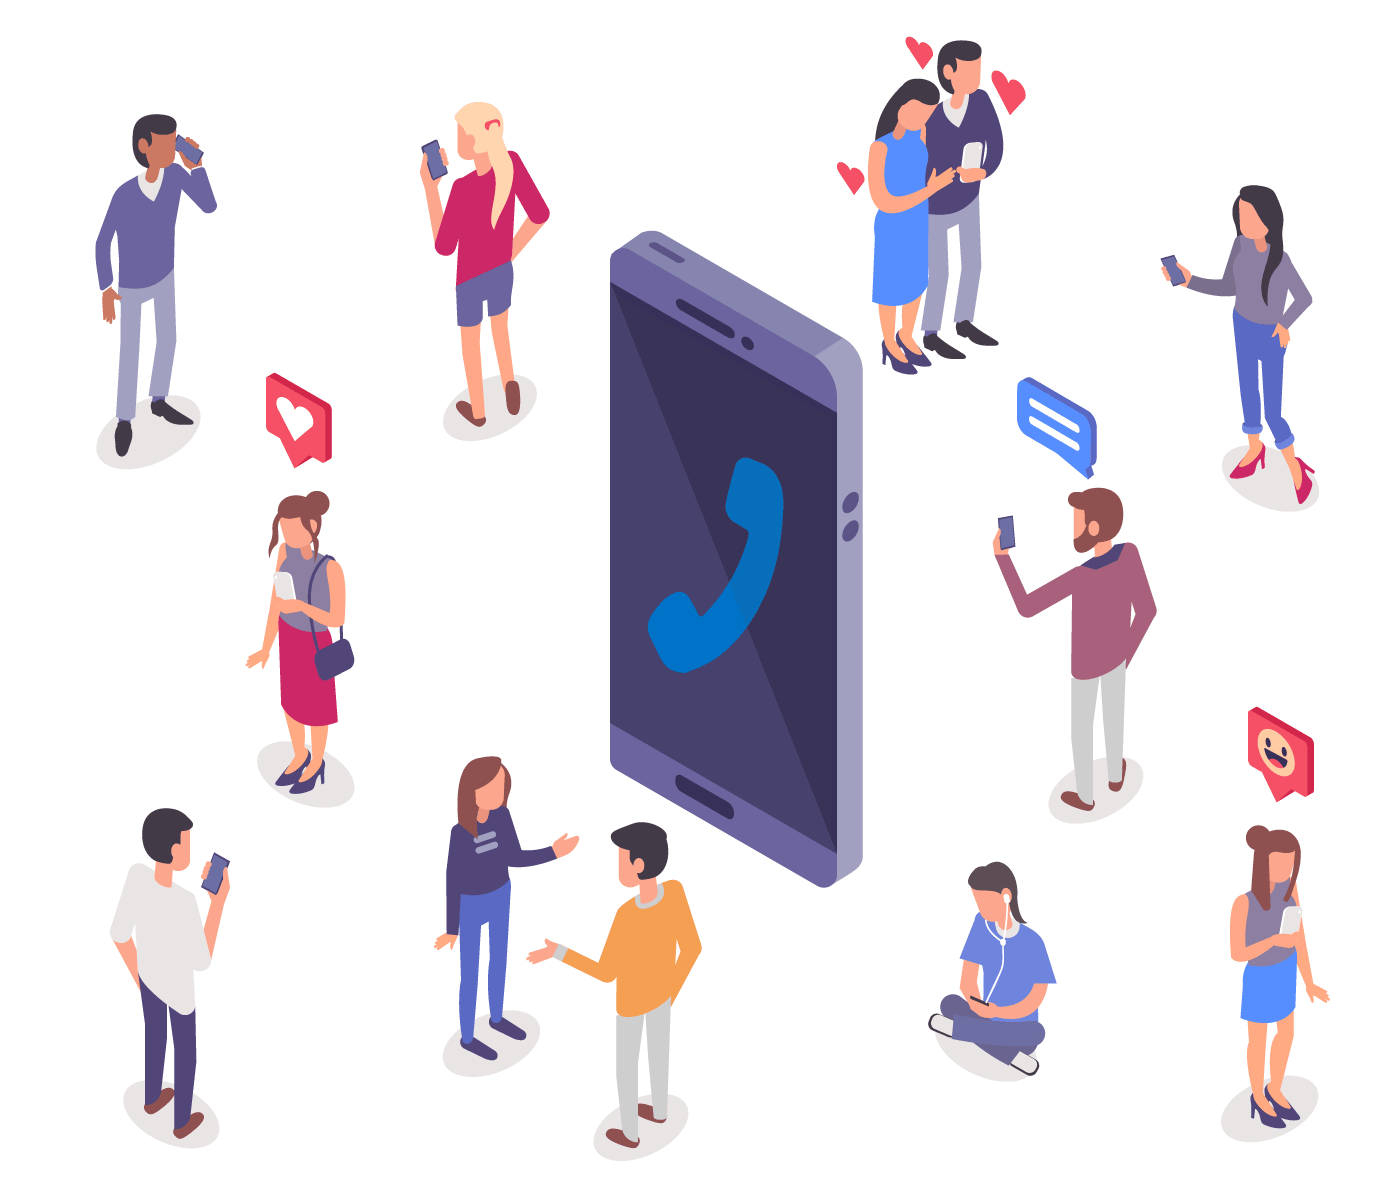 Free WiFi Calling and Texting App - Illustration of mobile phone in middle with Talkatone logo surrounded by people making calls and texting activities